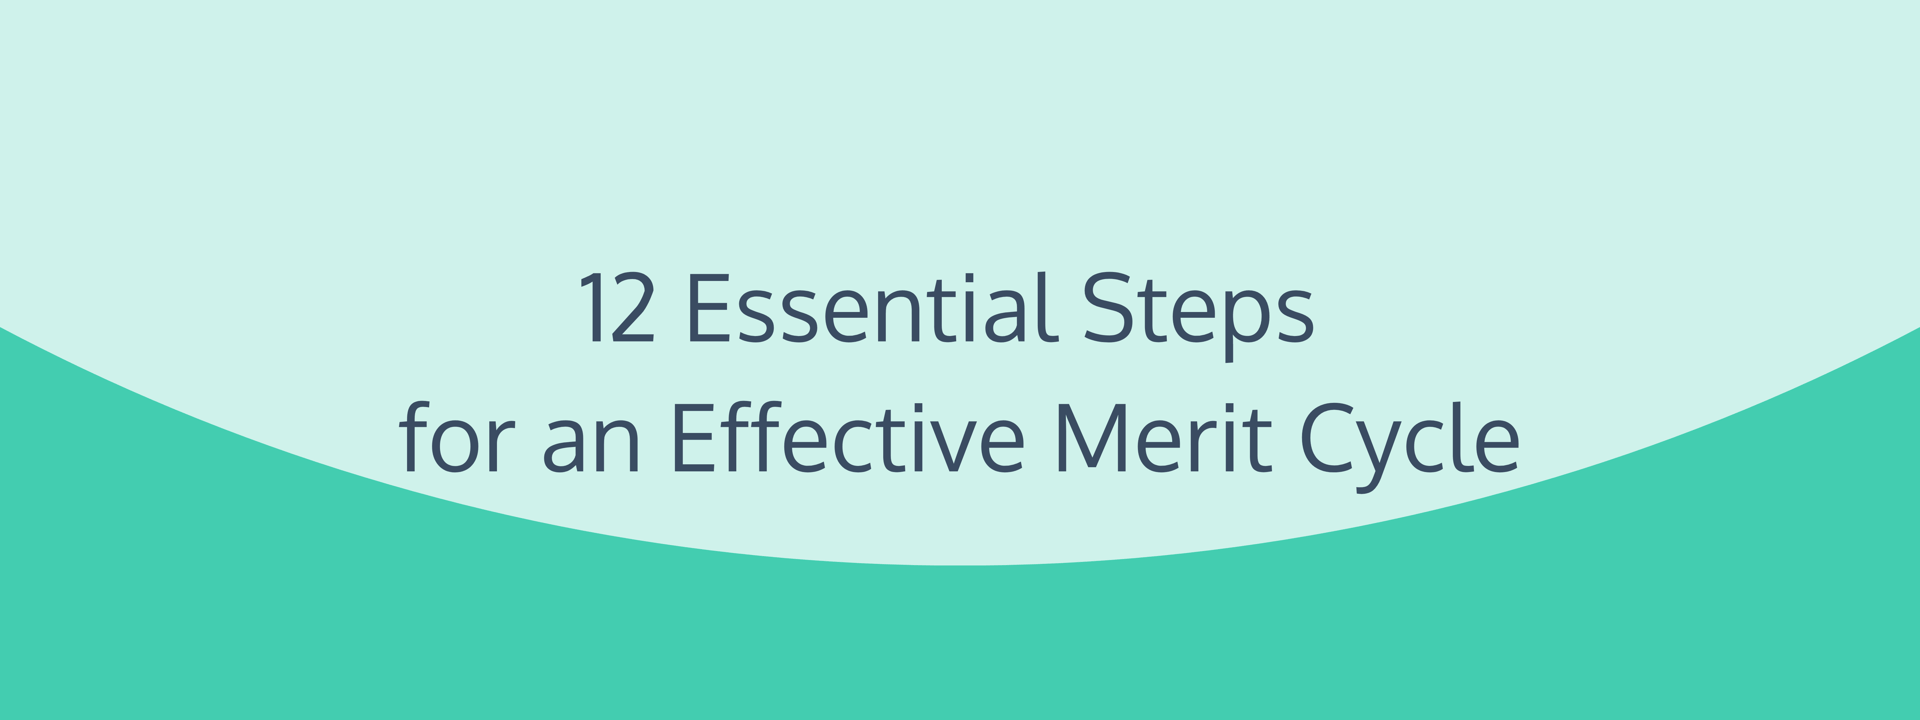 12 Essential Steps for an Effective Merit Cycle